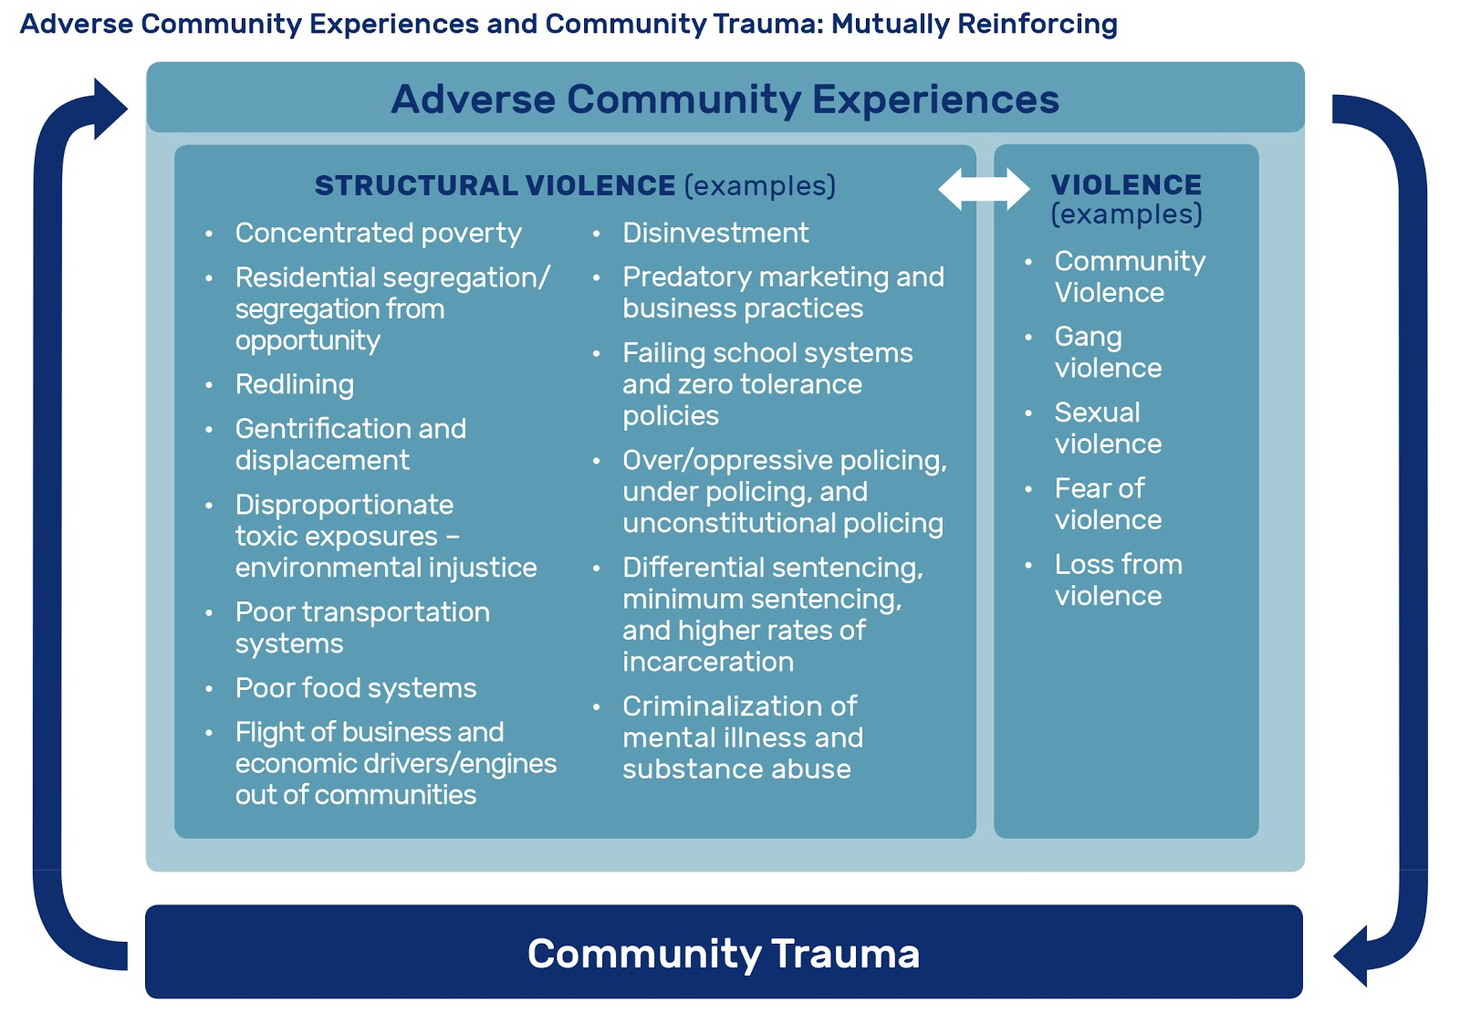 This illustration from Prevention Institute's Adverse Community Experiences and Resilience Framework shows how Structural violence, violence, and trauma create a self-perpetuating, mutually reinforcing cycles.